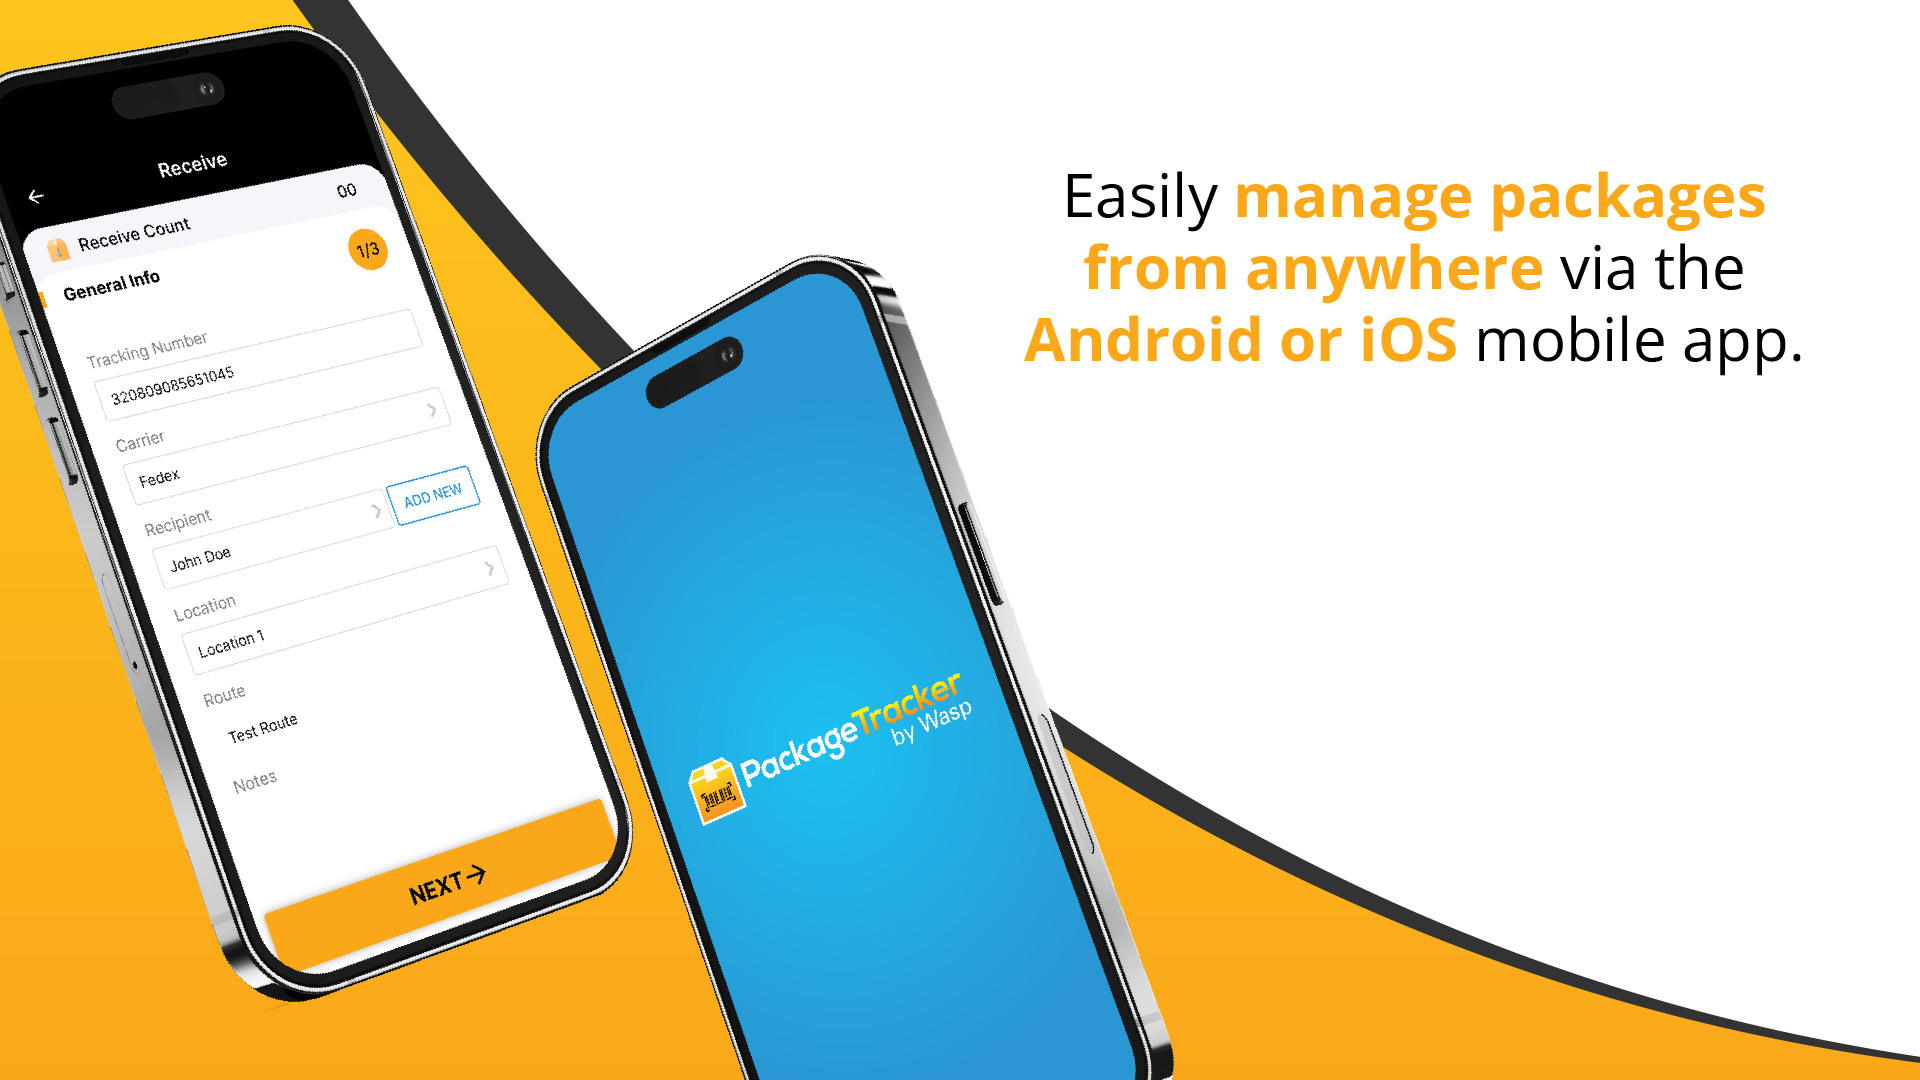 Easily manage packages from anywhere via the Android or iOS mobile app